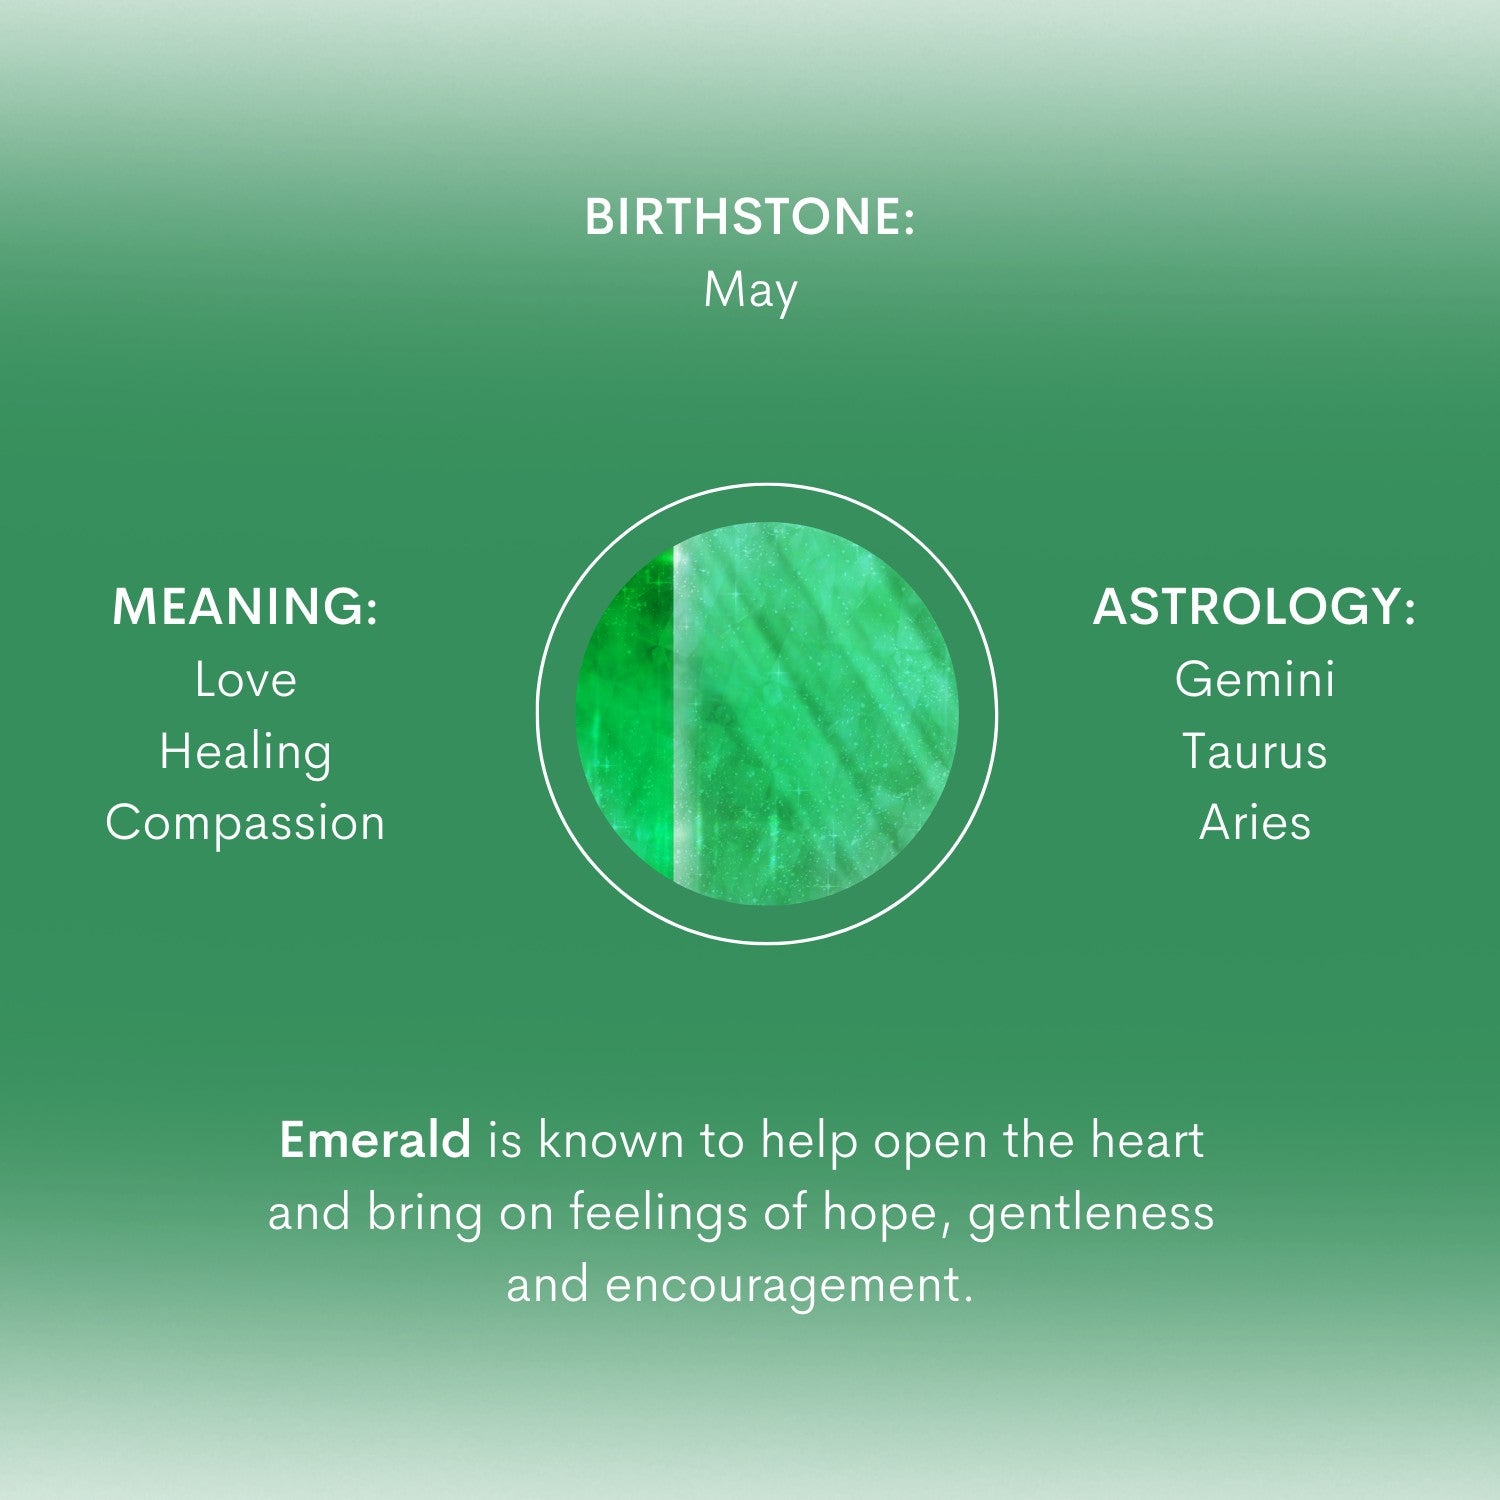 Emerald is known to help open the heart and bring on feelings of hope, gentleness and encouragement